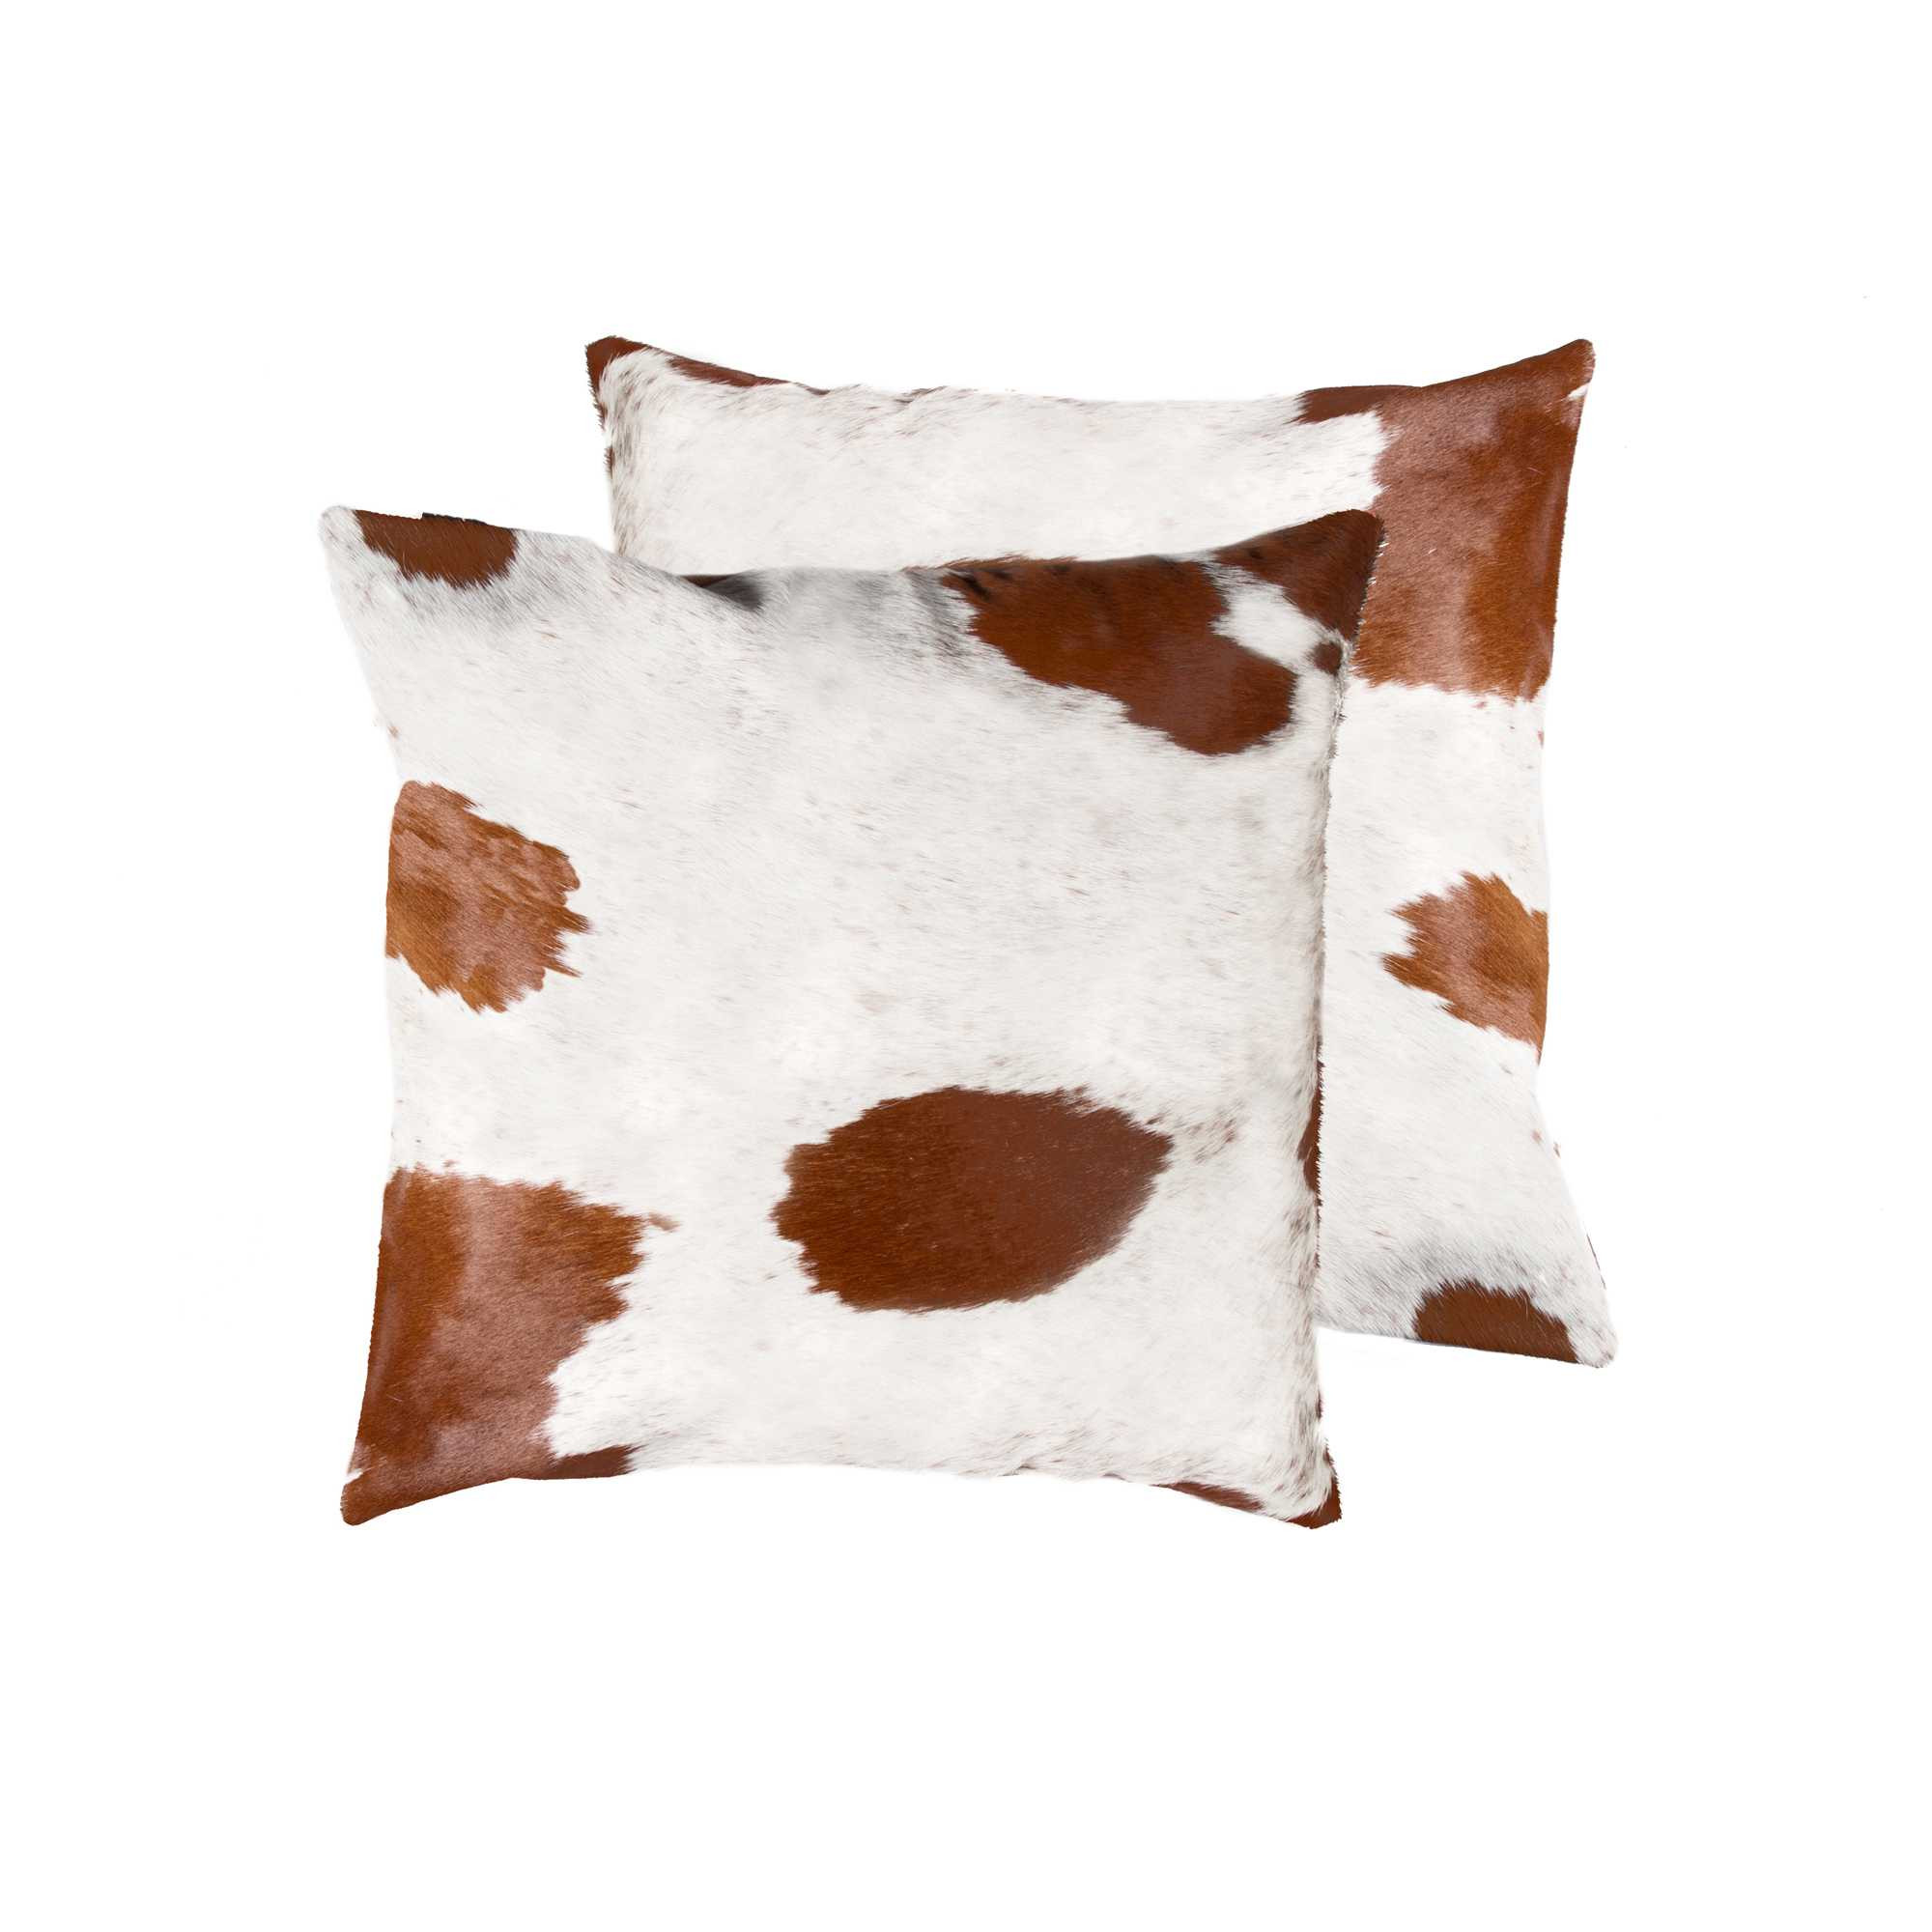 18" X 18" X 5" White And Brown Cowhide  Pillow 2 Pack-317126-1